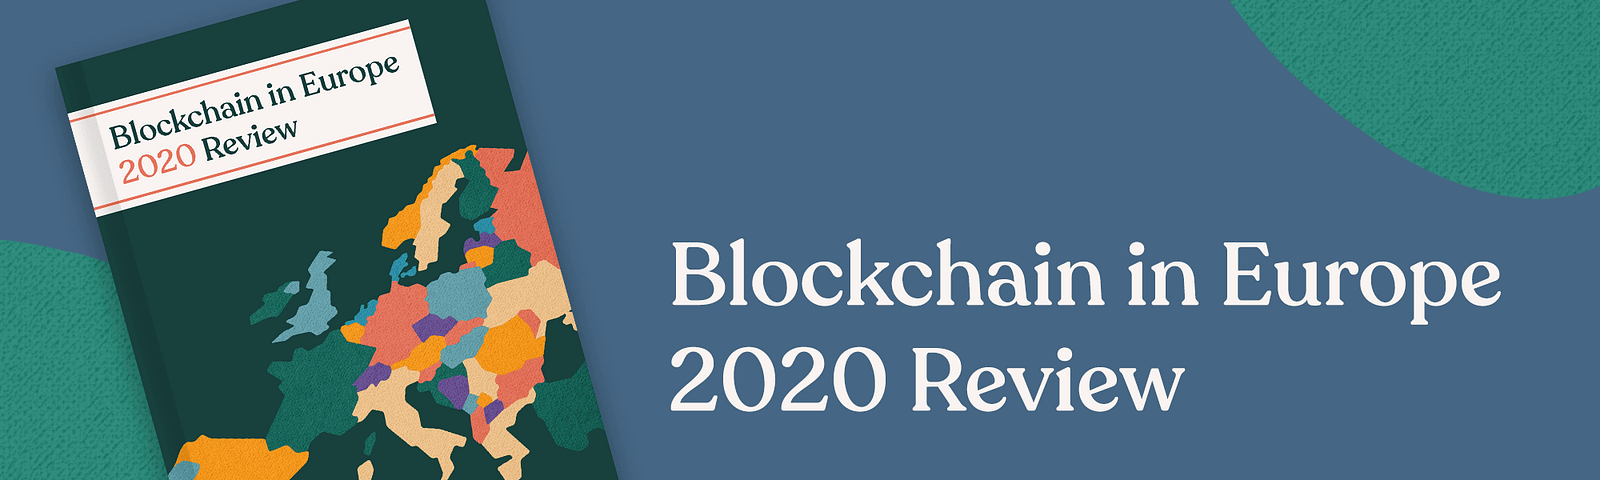 Blockchain in Europe 2020 Review